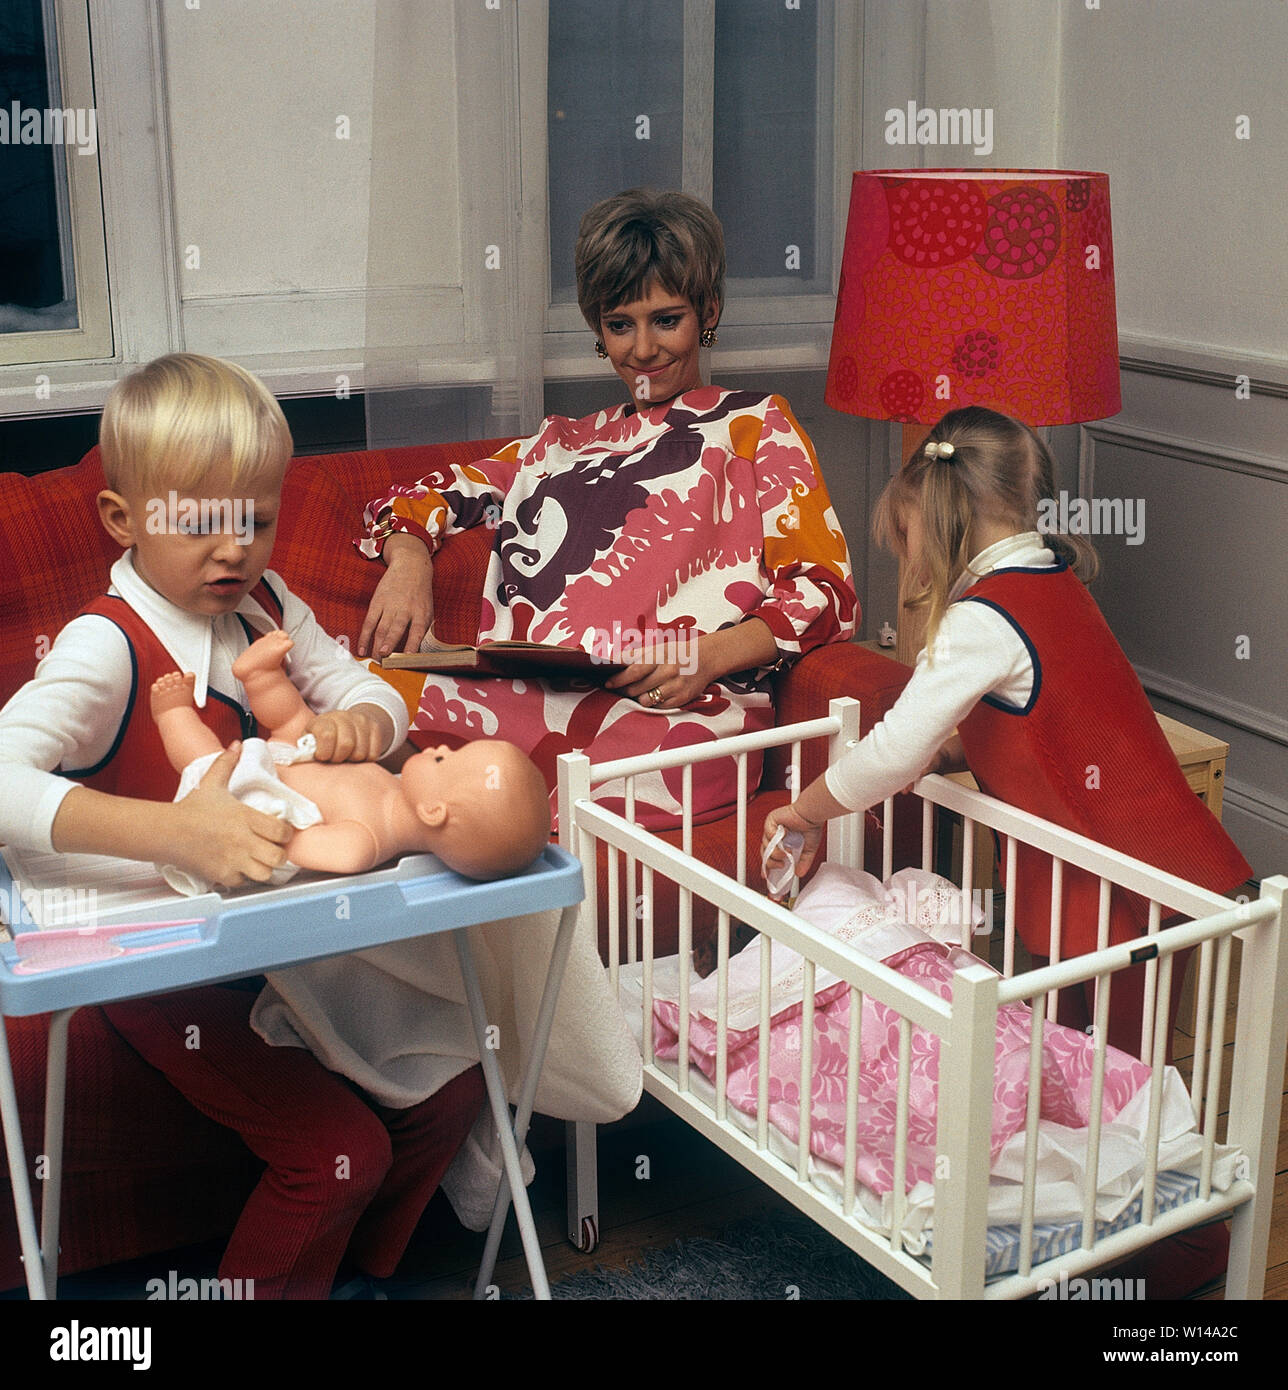 1960s mother. A young woman is reading a book while her children are playing together with dolls. The boy plays with a doll and puts clothes on it. The 60s was the decade of equality. Sweden 1964 Stock Photo